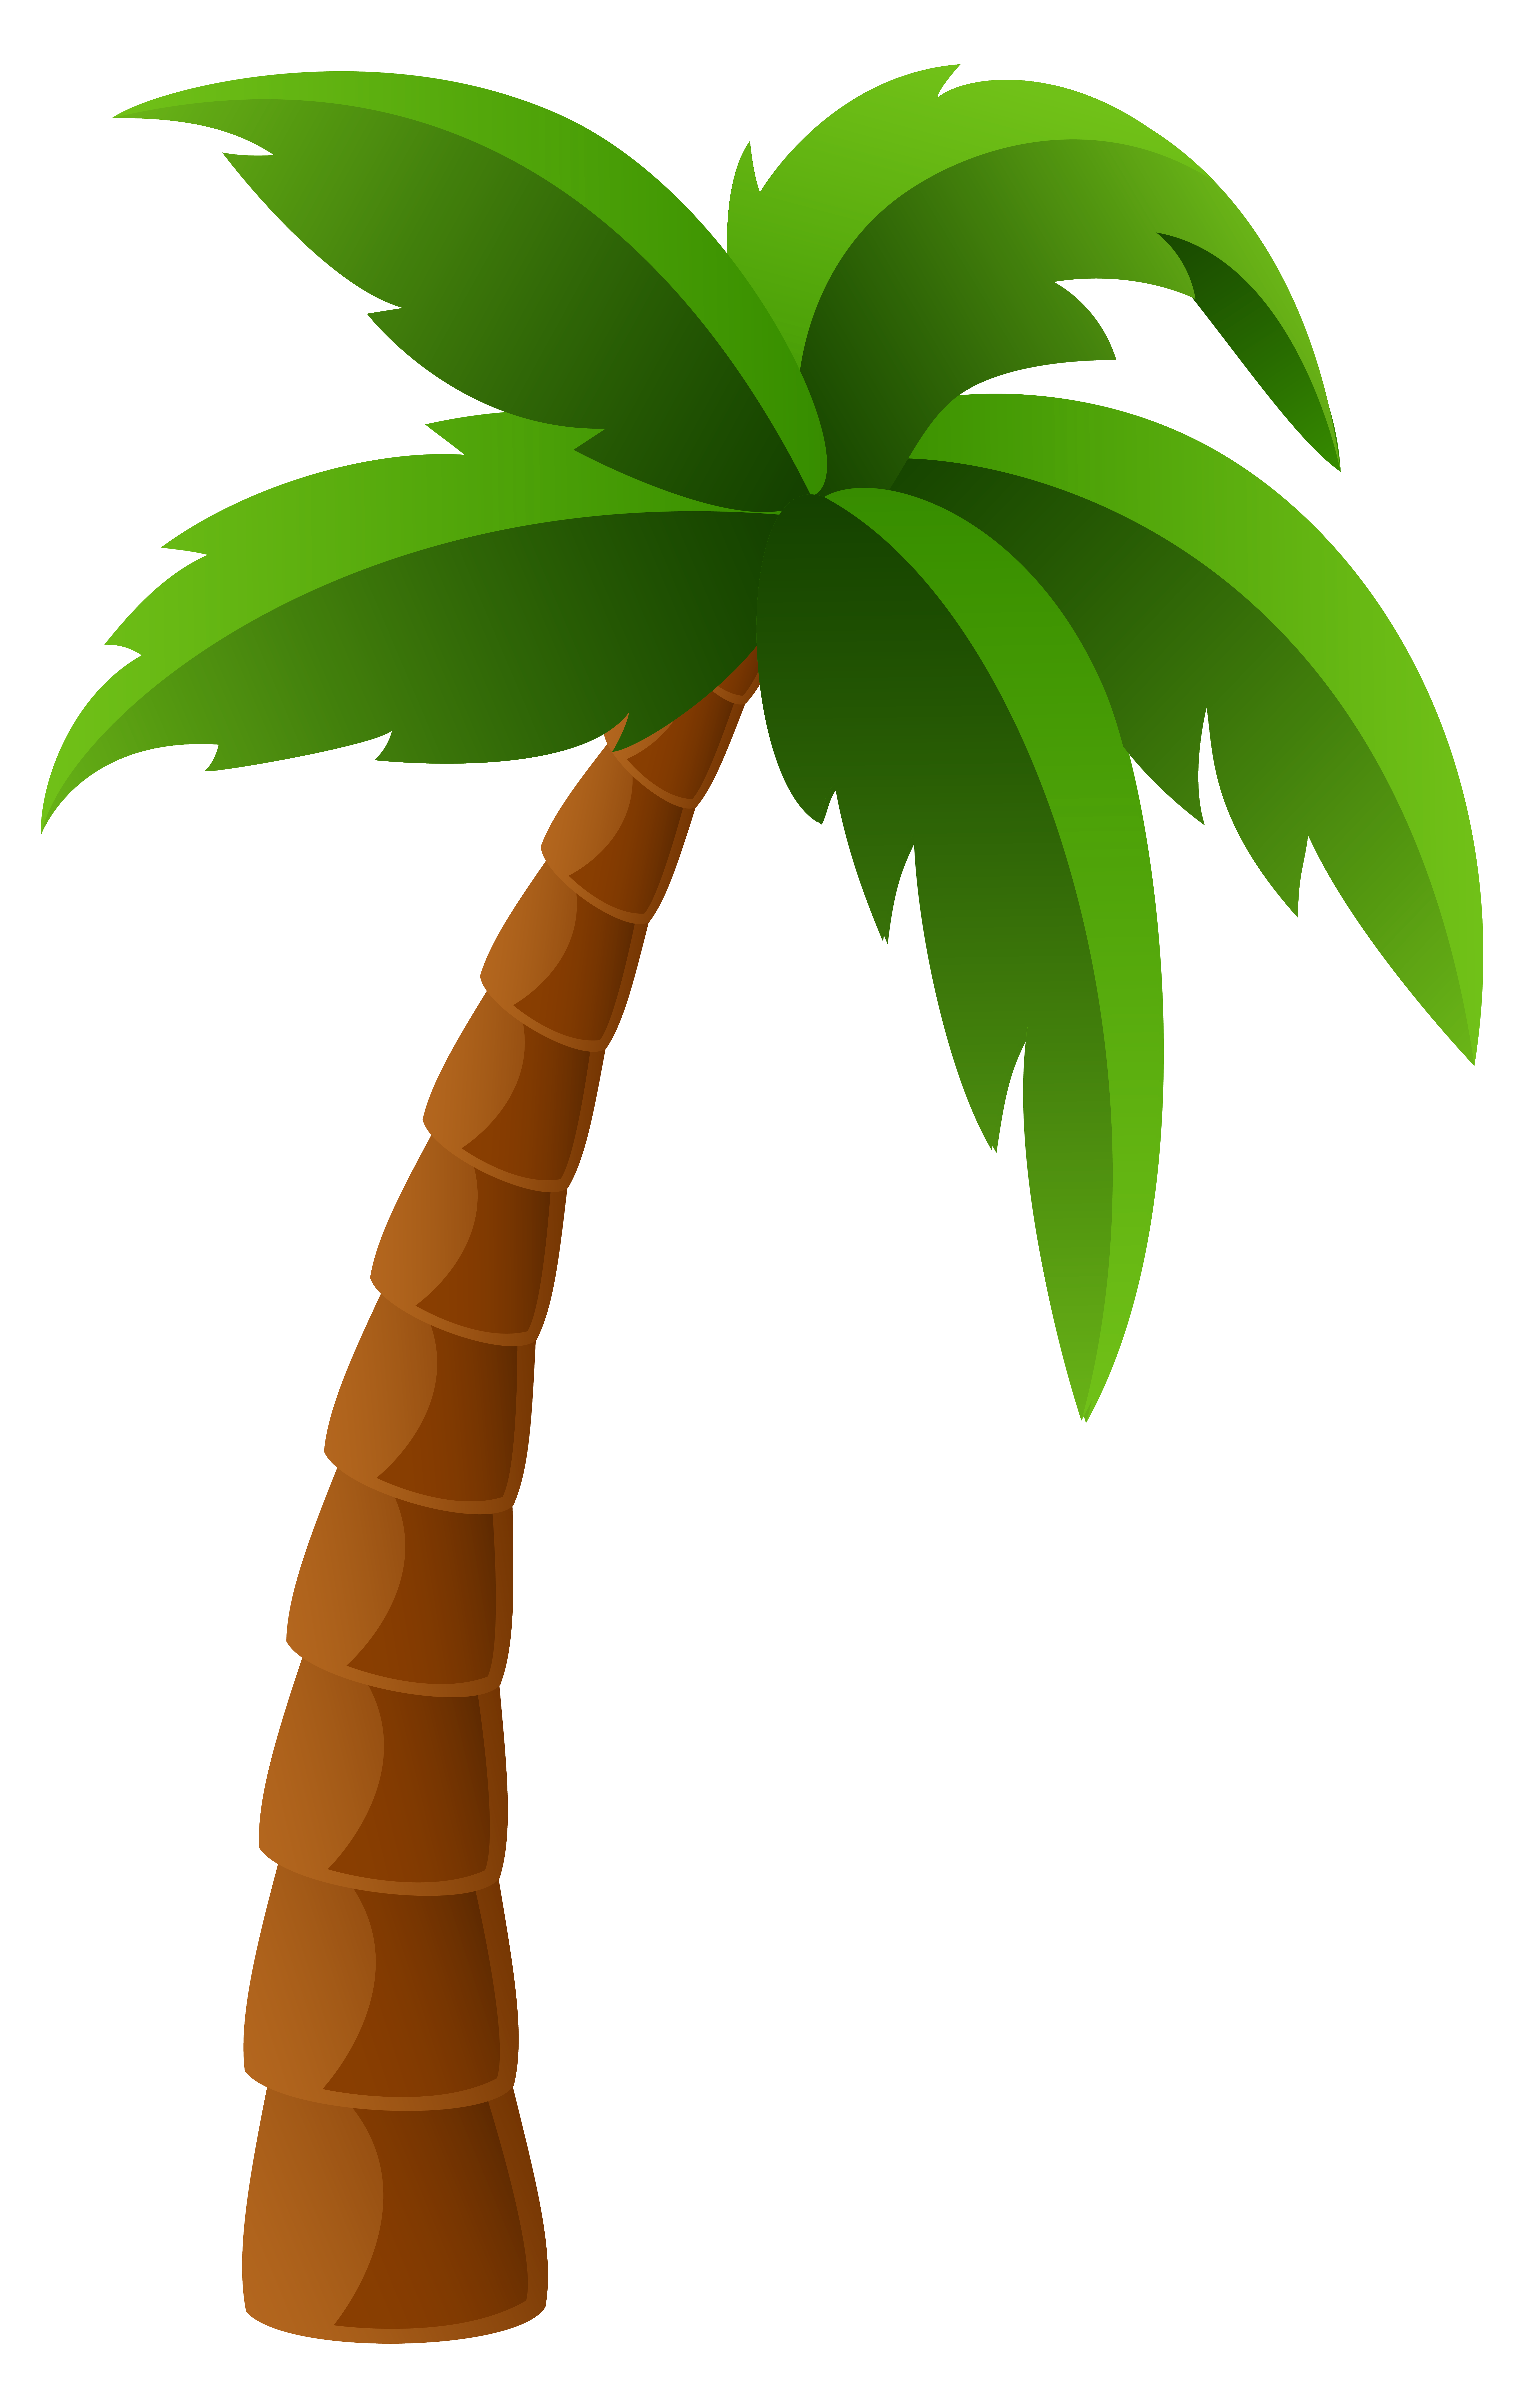 Png image gallery yopriceville. Waves clipart palm tree